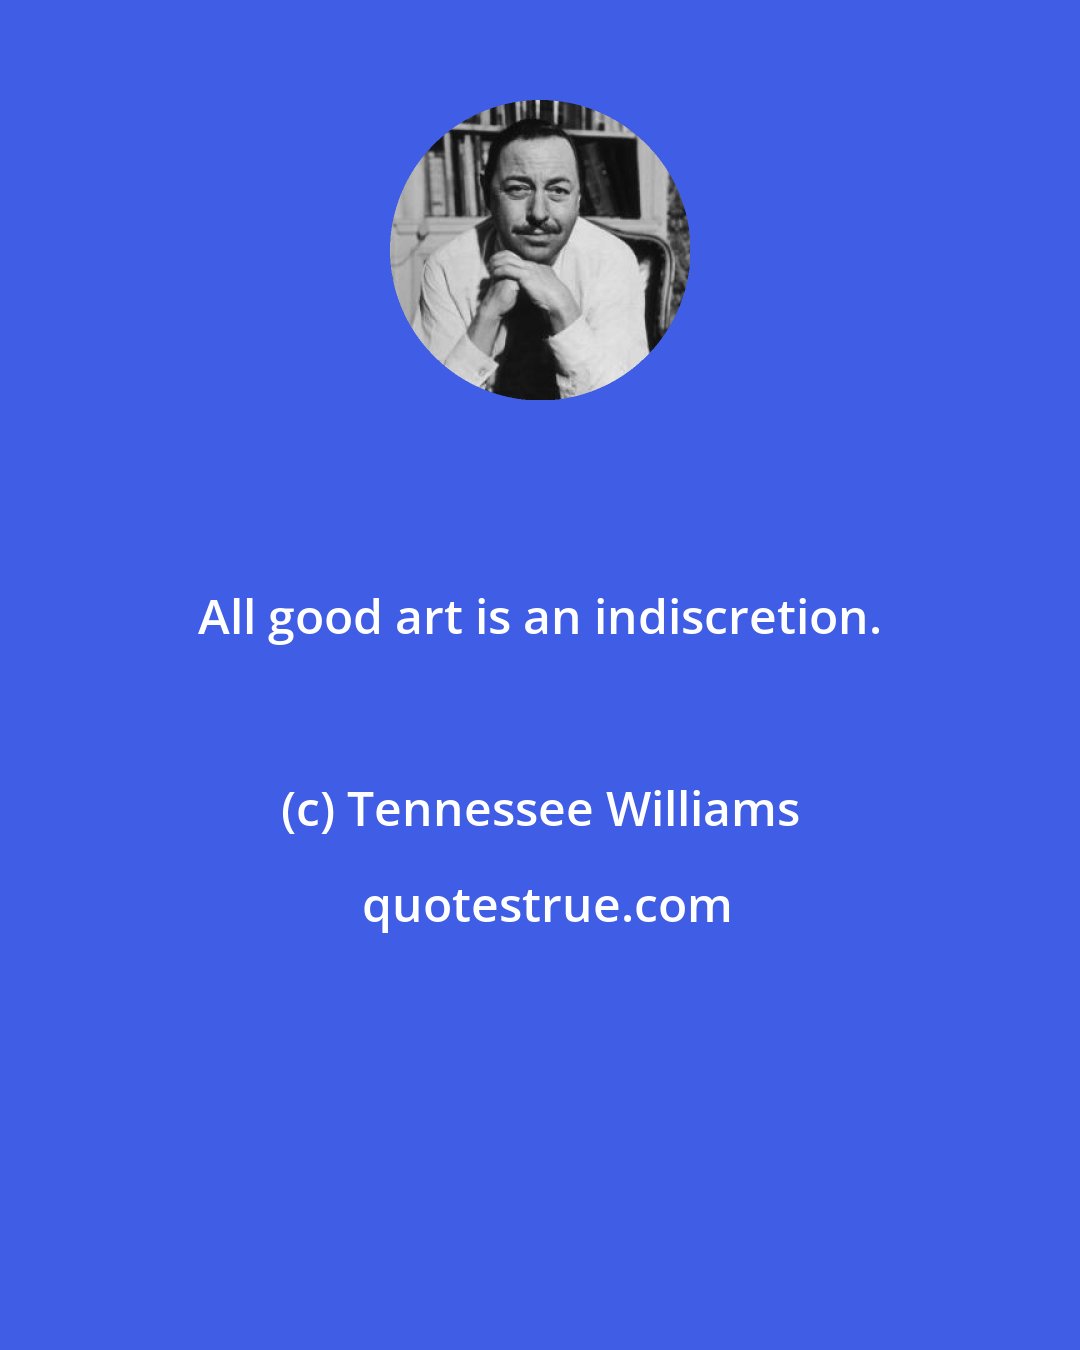 Tennessee Williams: All good art is an indiscretion.